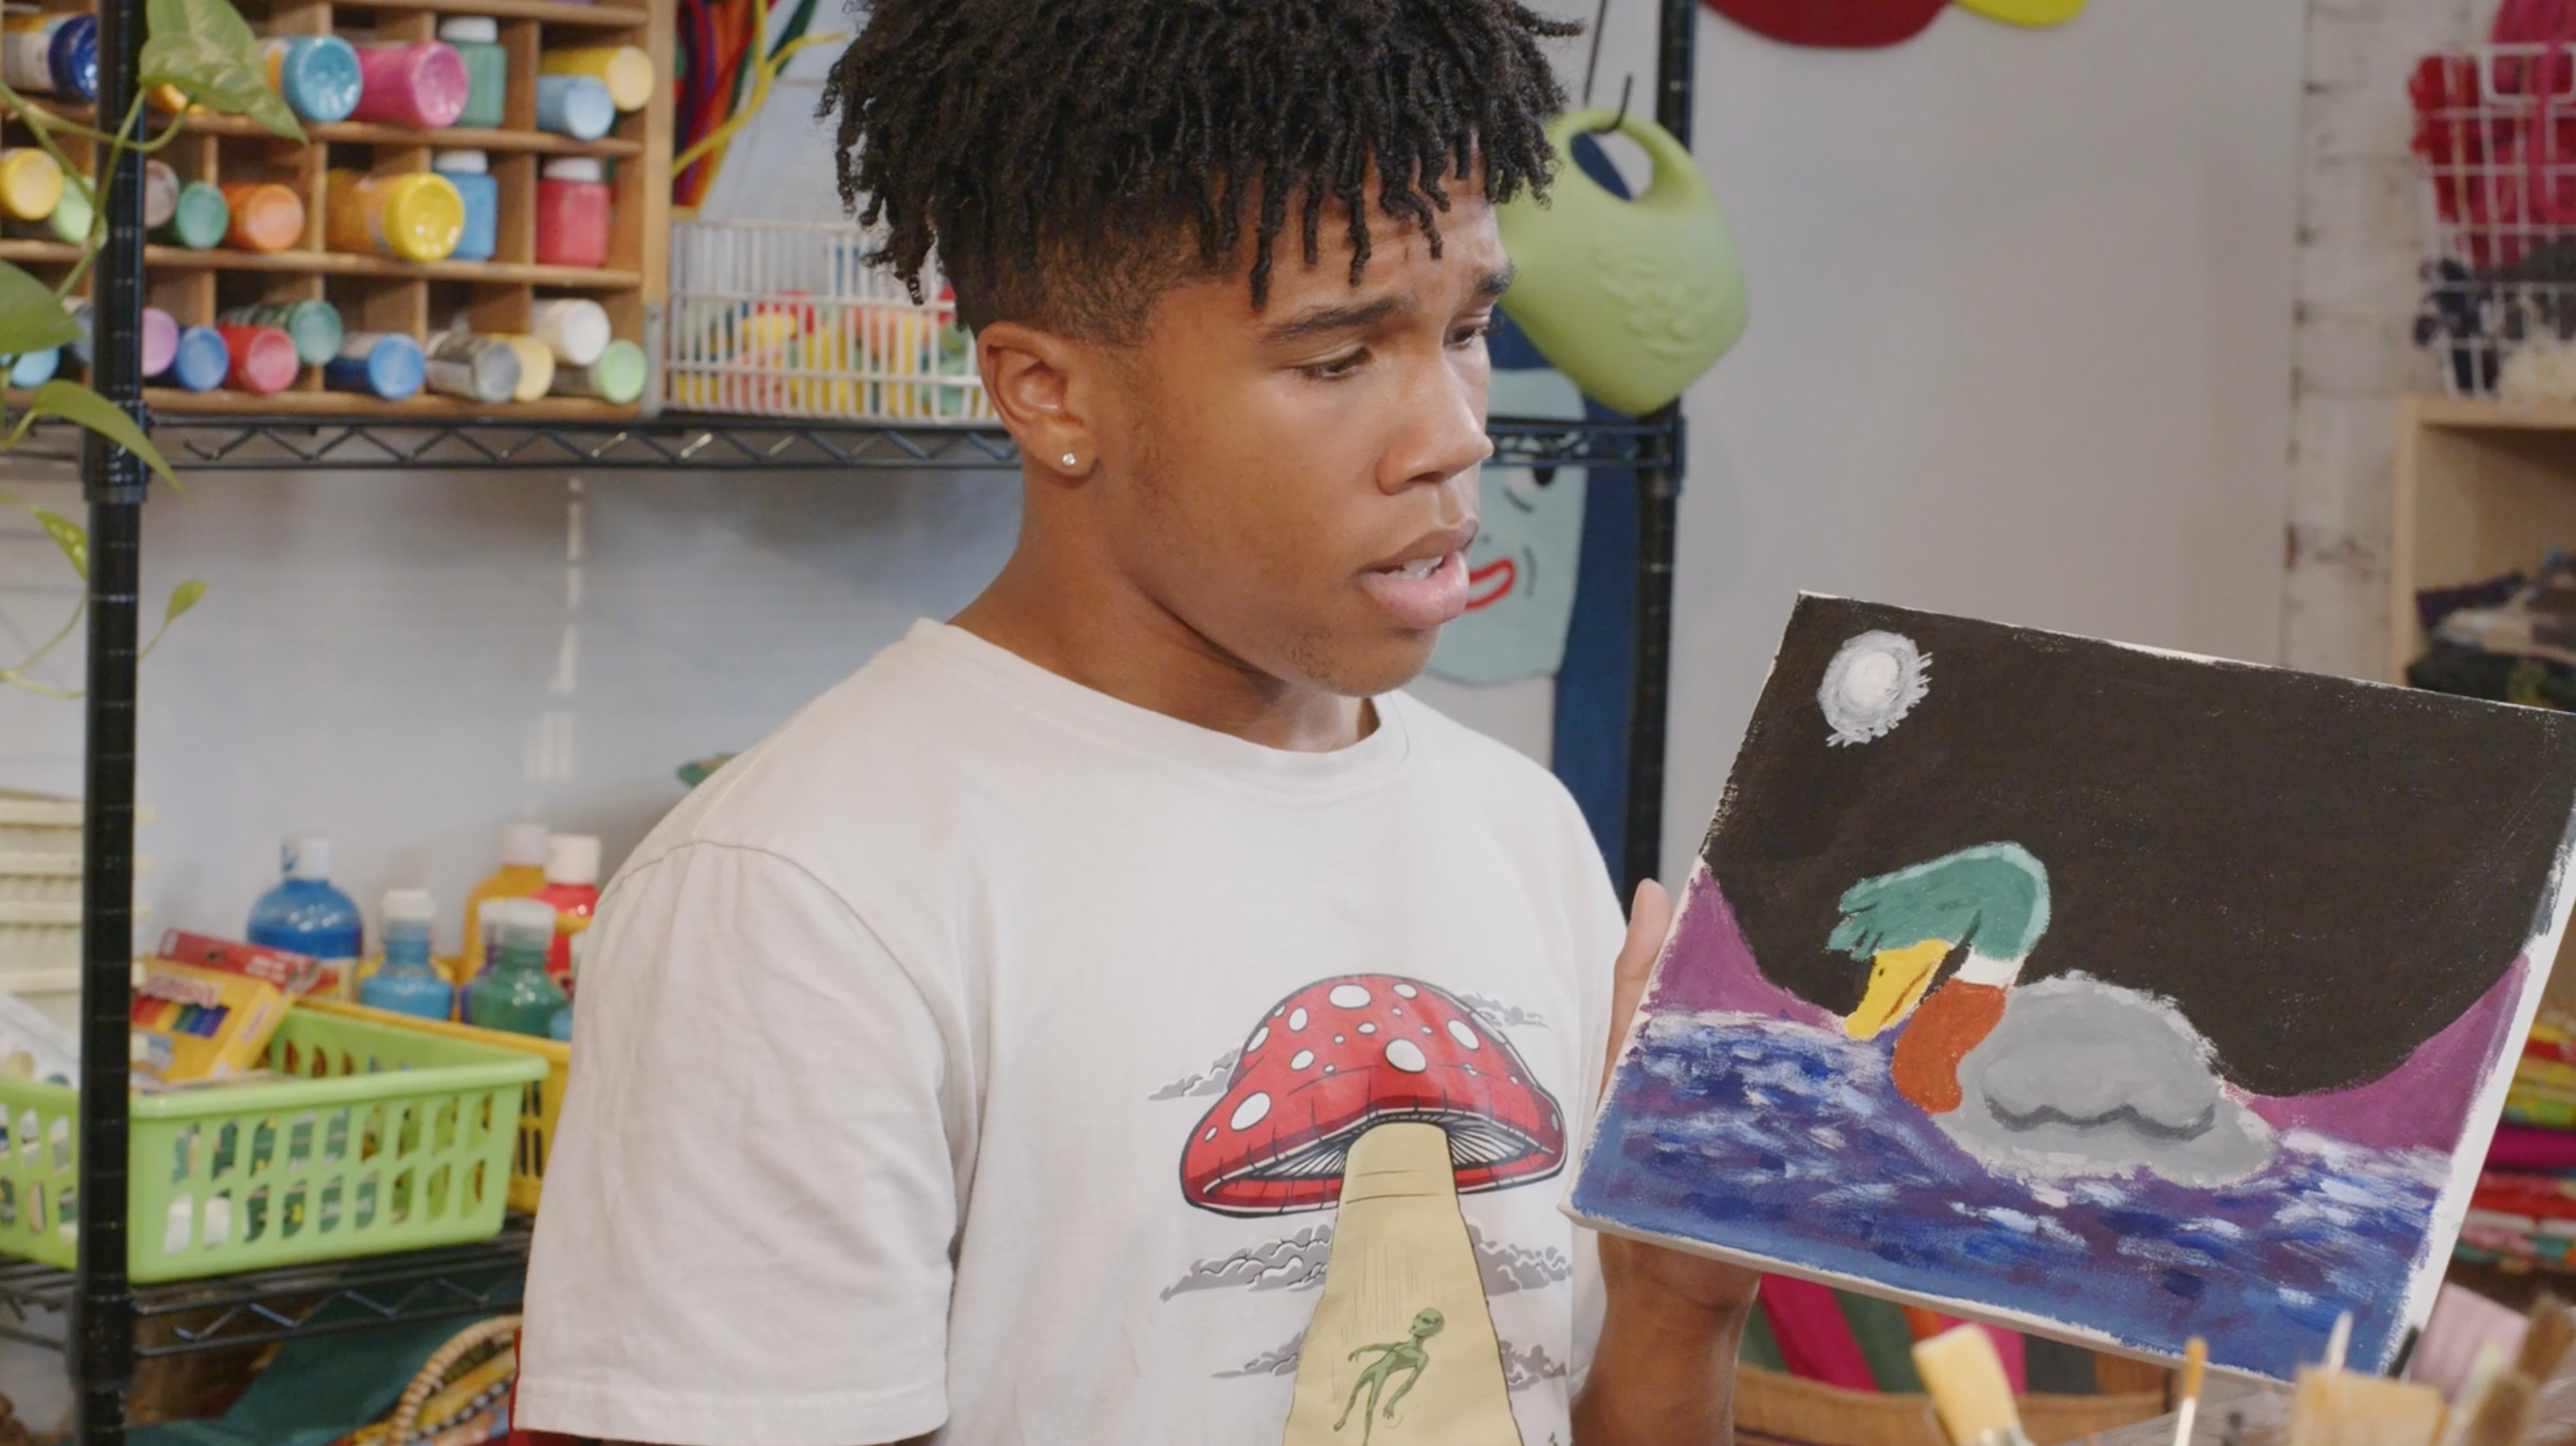 A Black man in a white t-shirt holds up a painting of a Mallard duck.